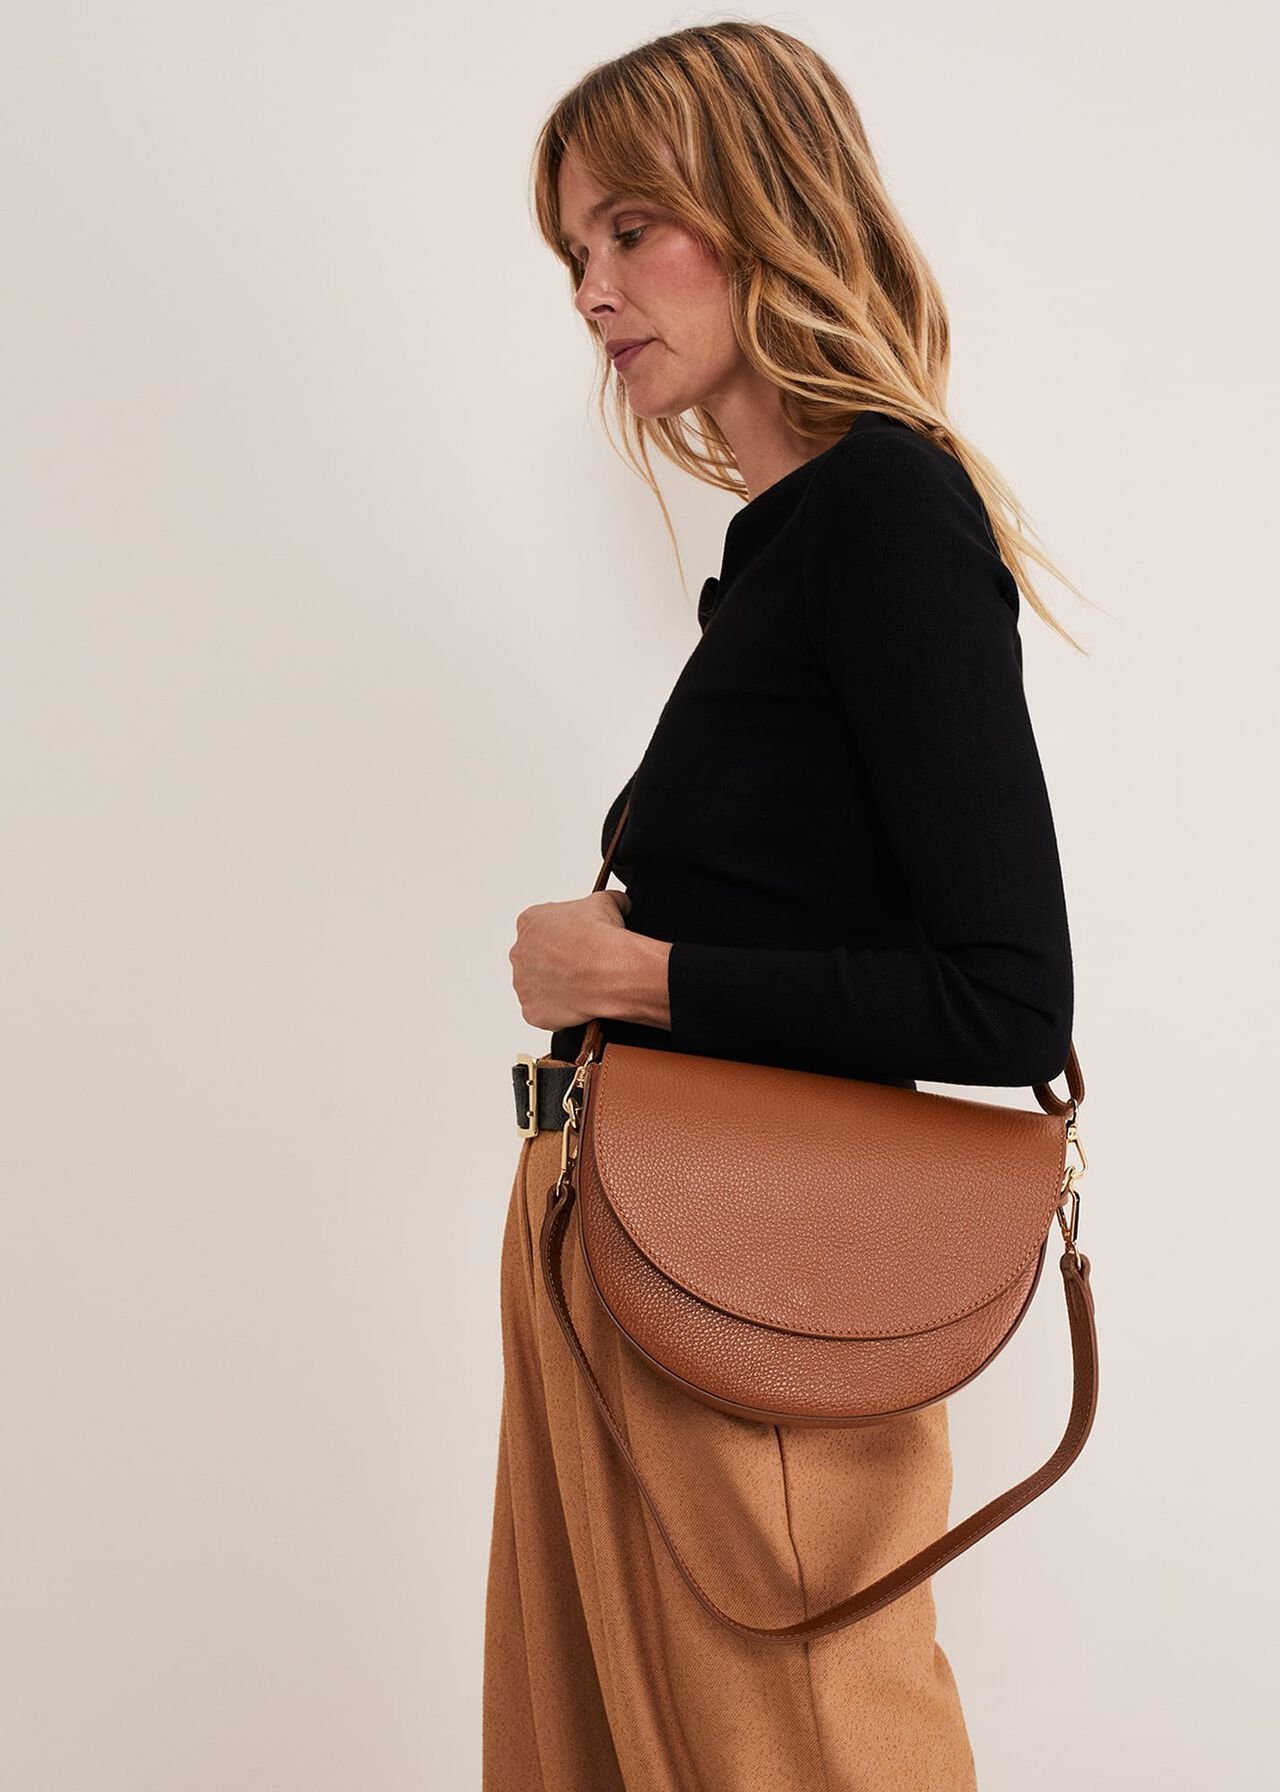 Textured Leather Cross Body Bag